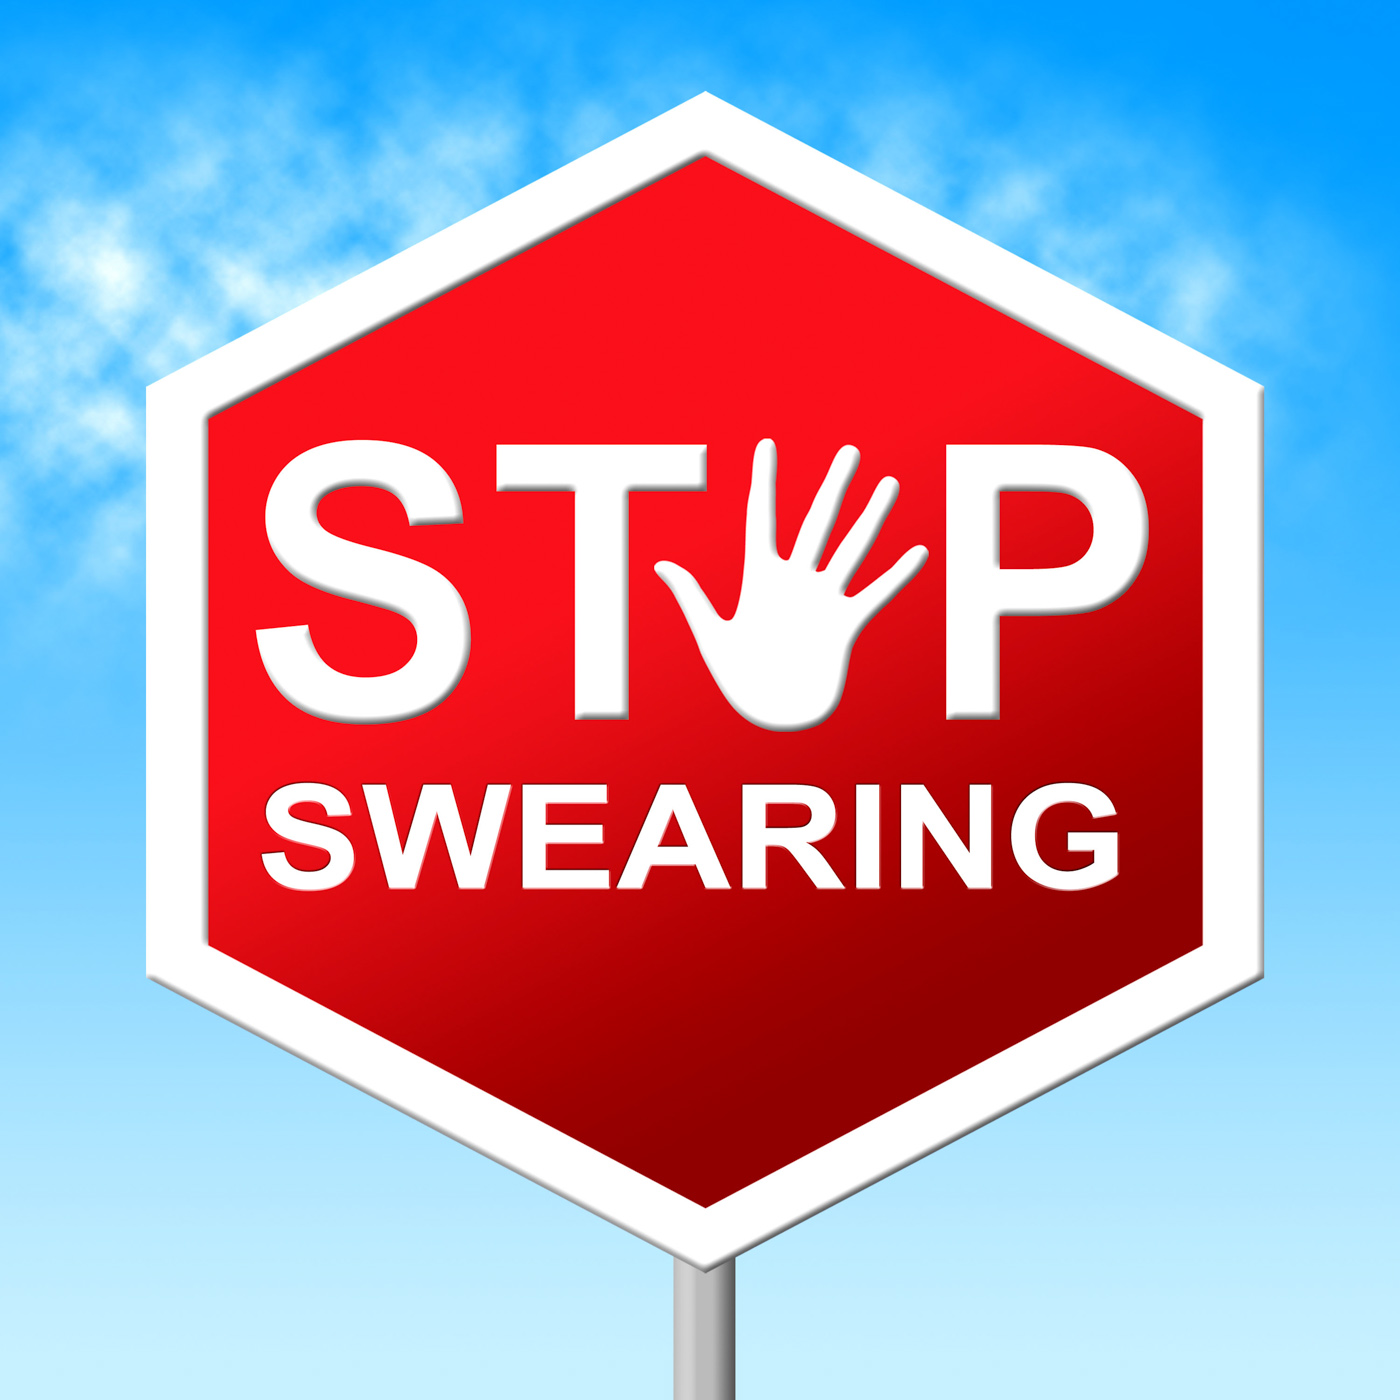 Swearing stop shows ill mannered and caution photo